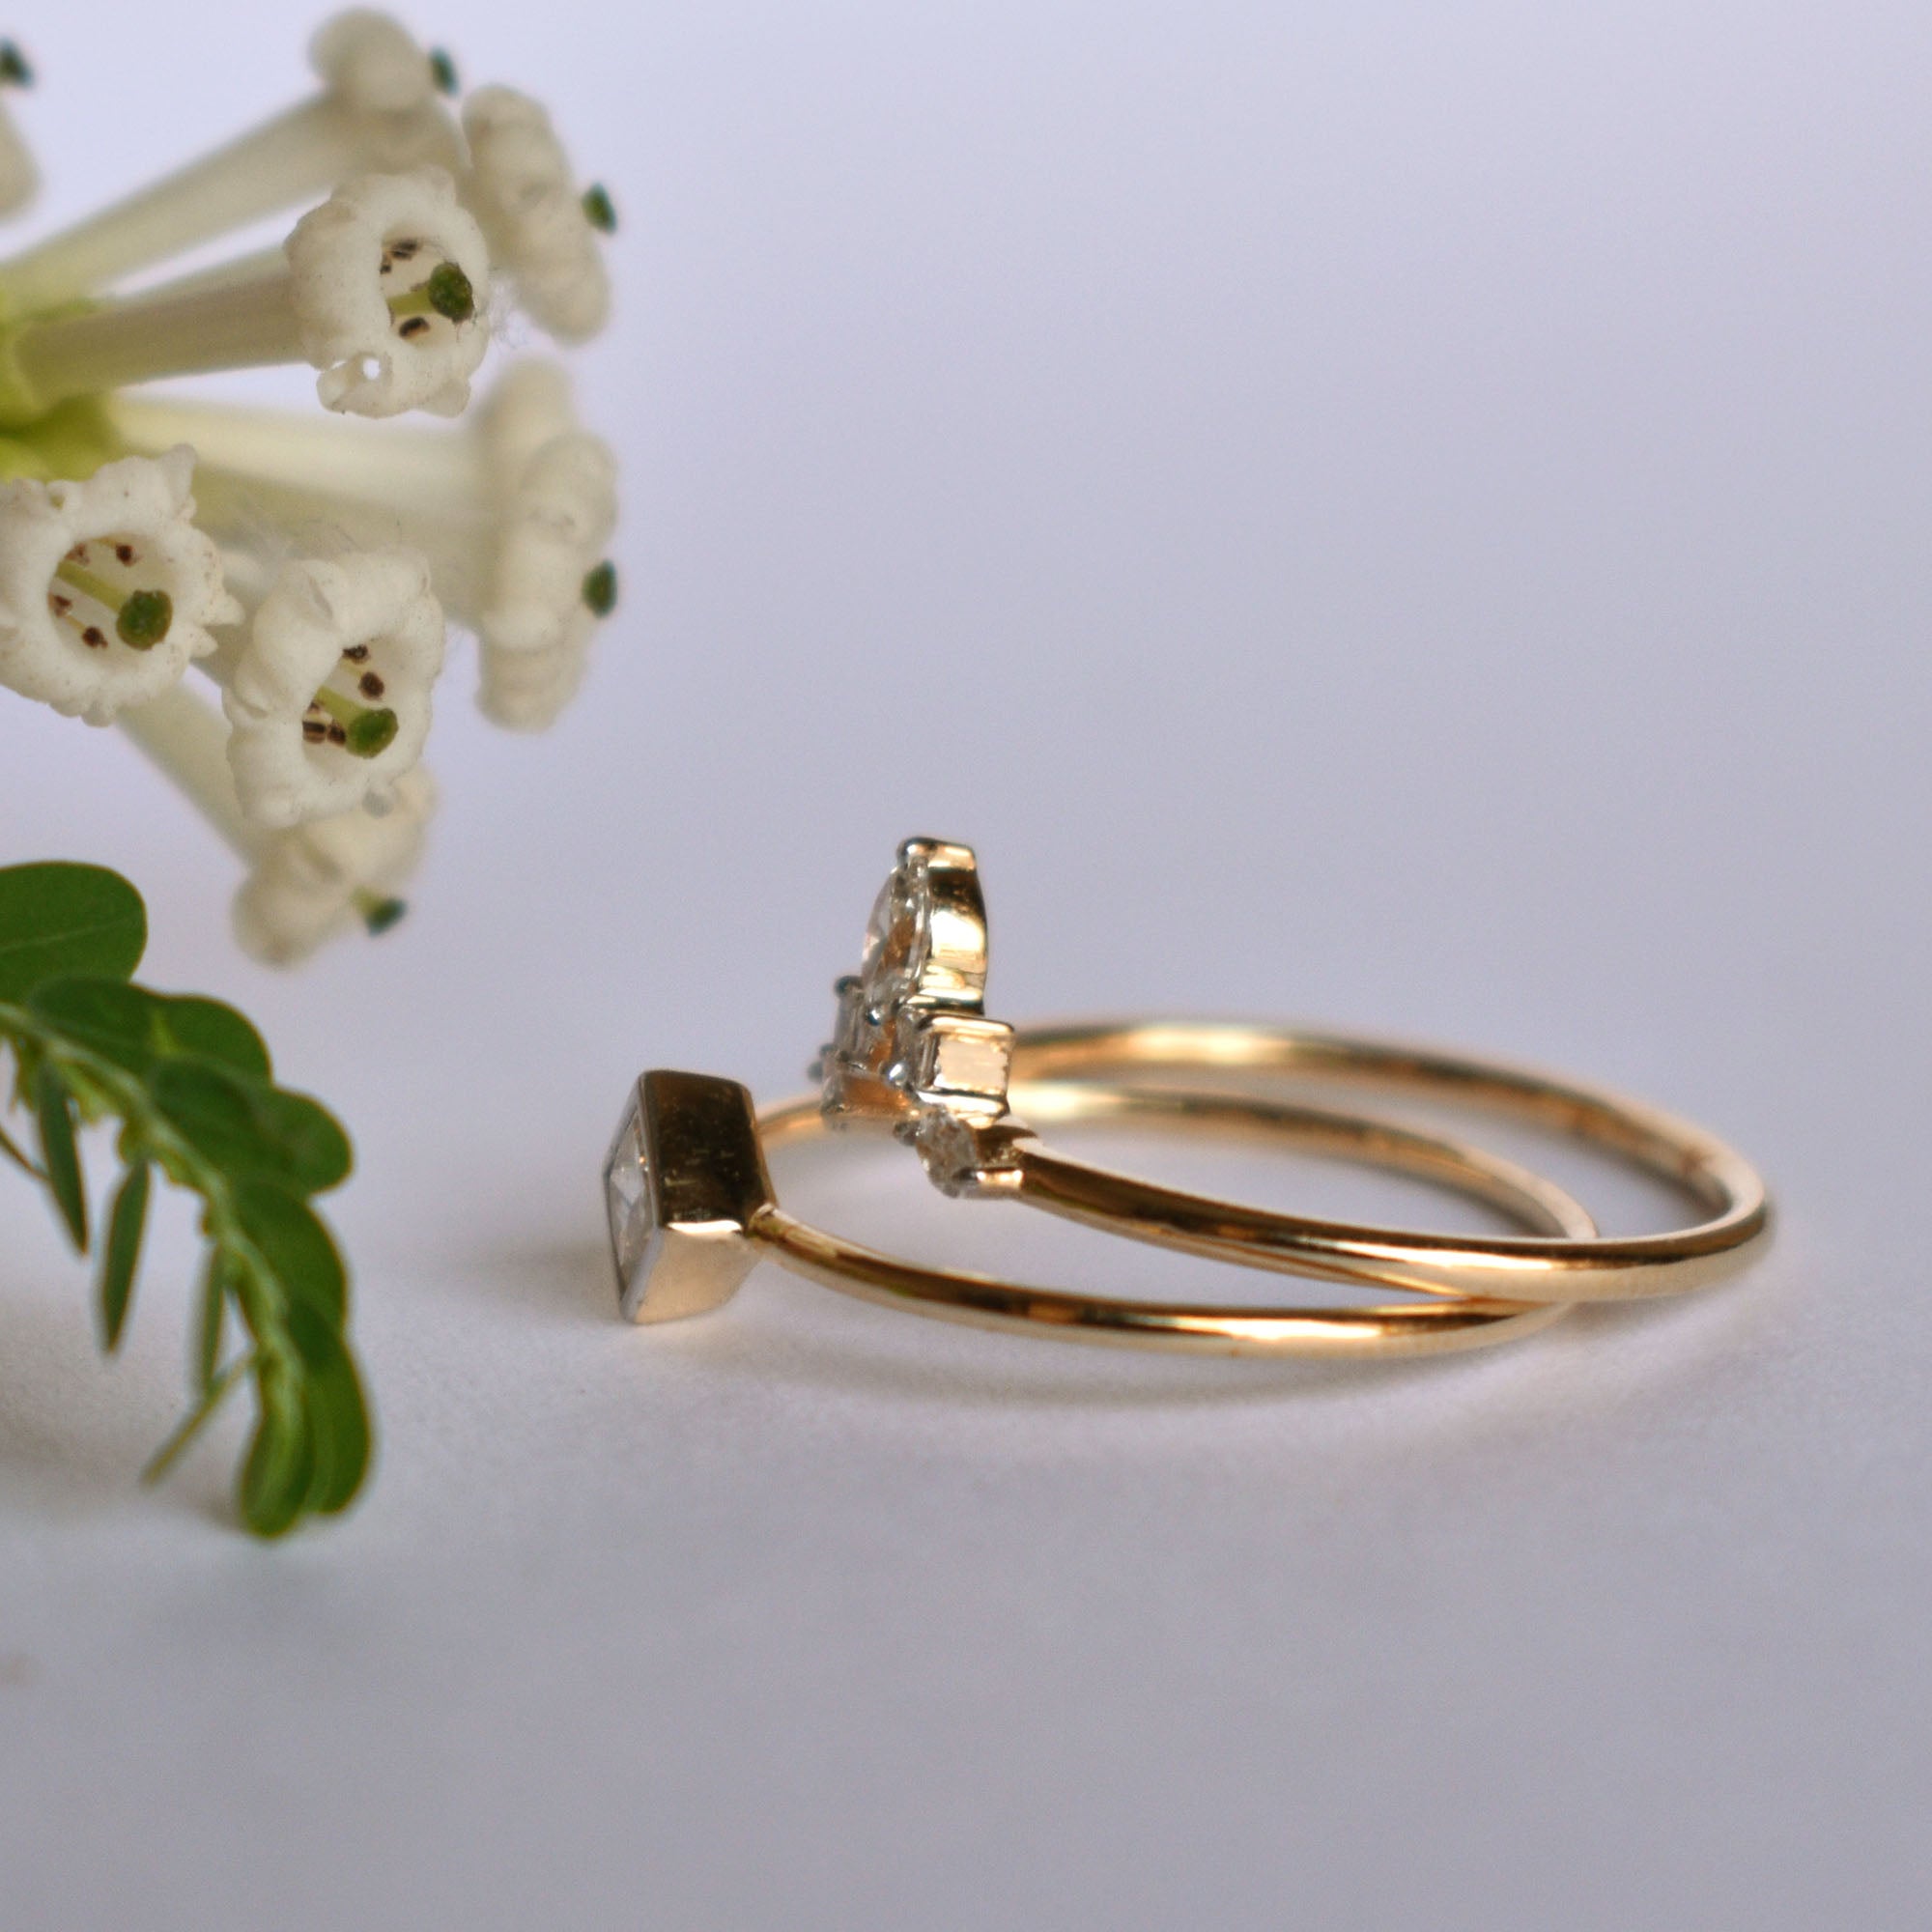 Simple Gold Wedding Band Set. His and Hers Wedding Rings. Gold Wedding Rings.  Thin Wedding Bands. Couple Rings Set. 14k Gold Bands. - Etsy